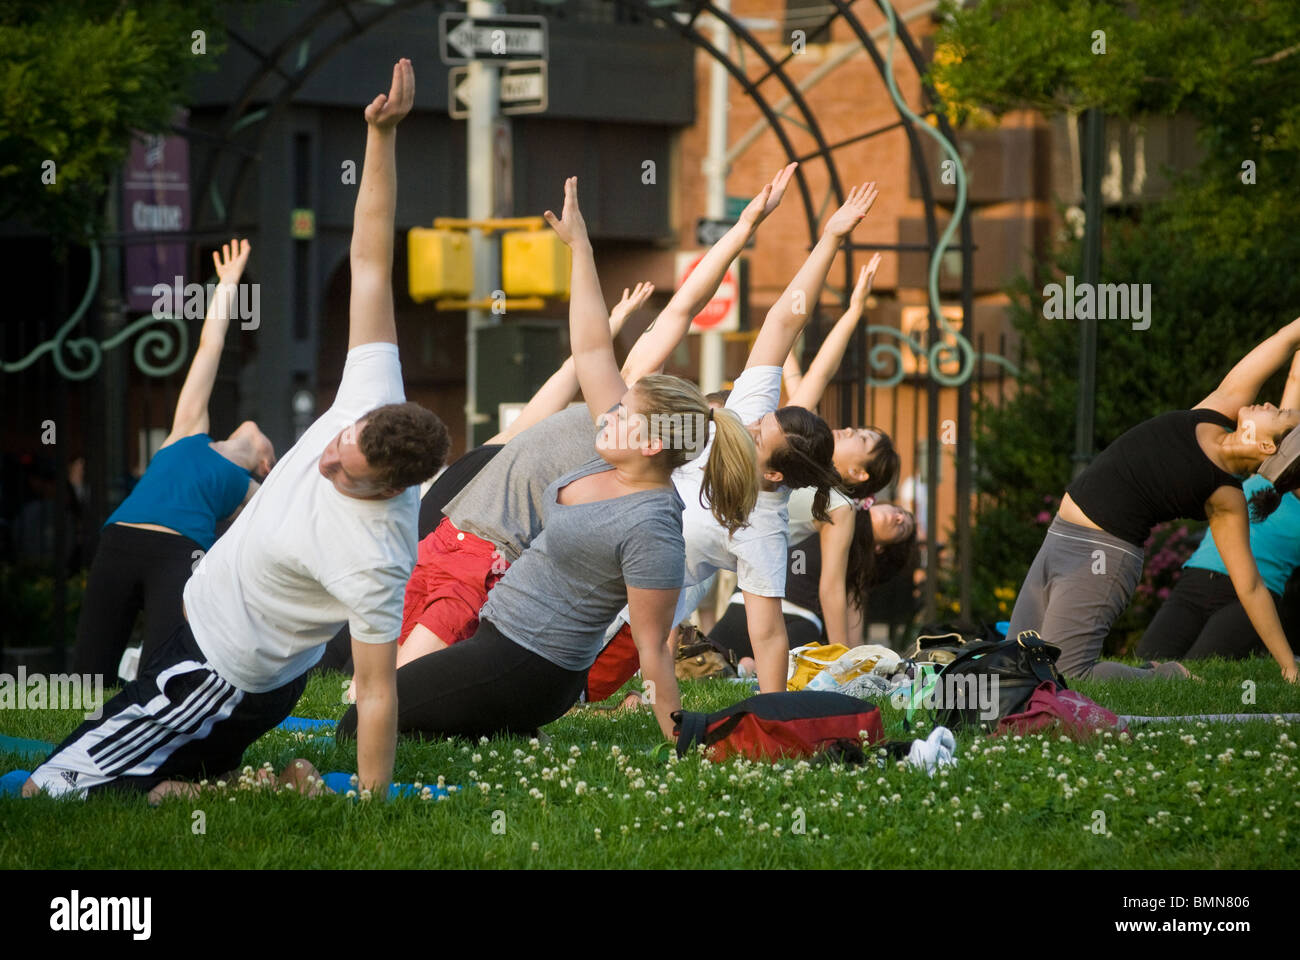 Yoga practitioners participate in a free yoga class in the New York neighborhood of Chelsea Stock Photo